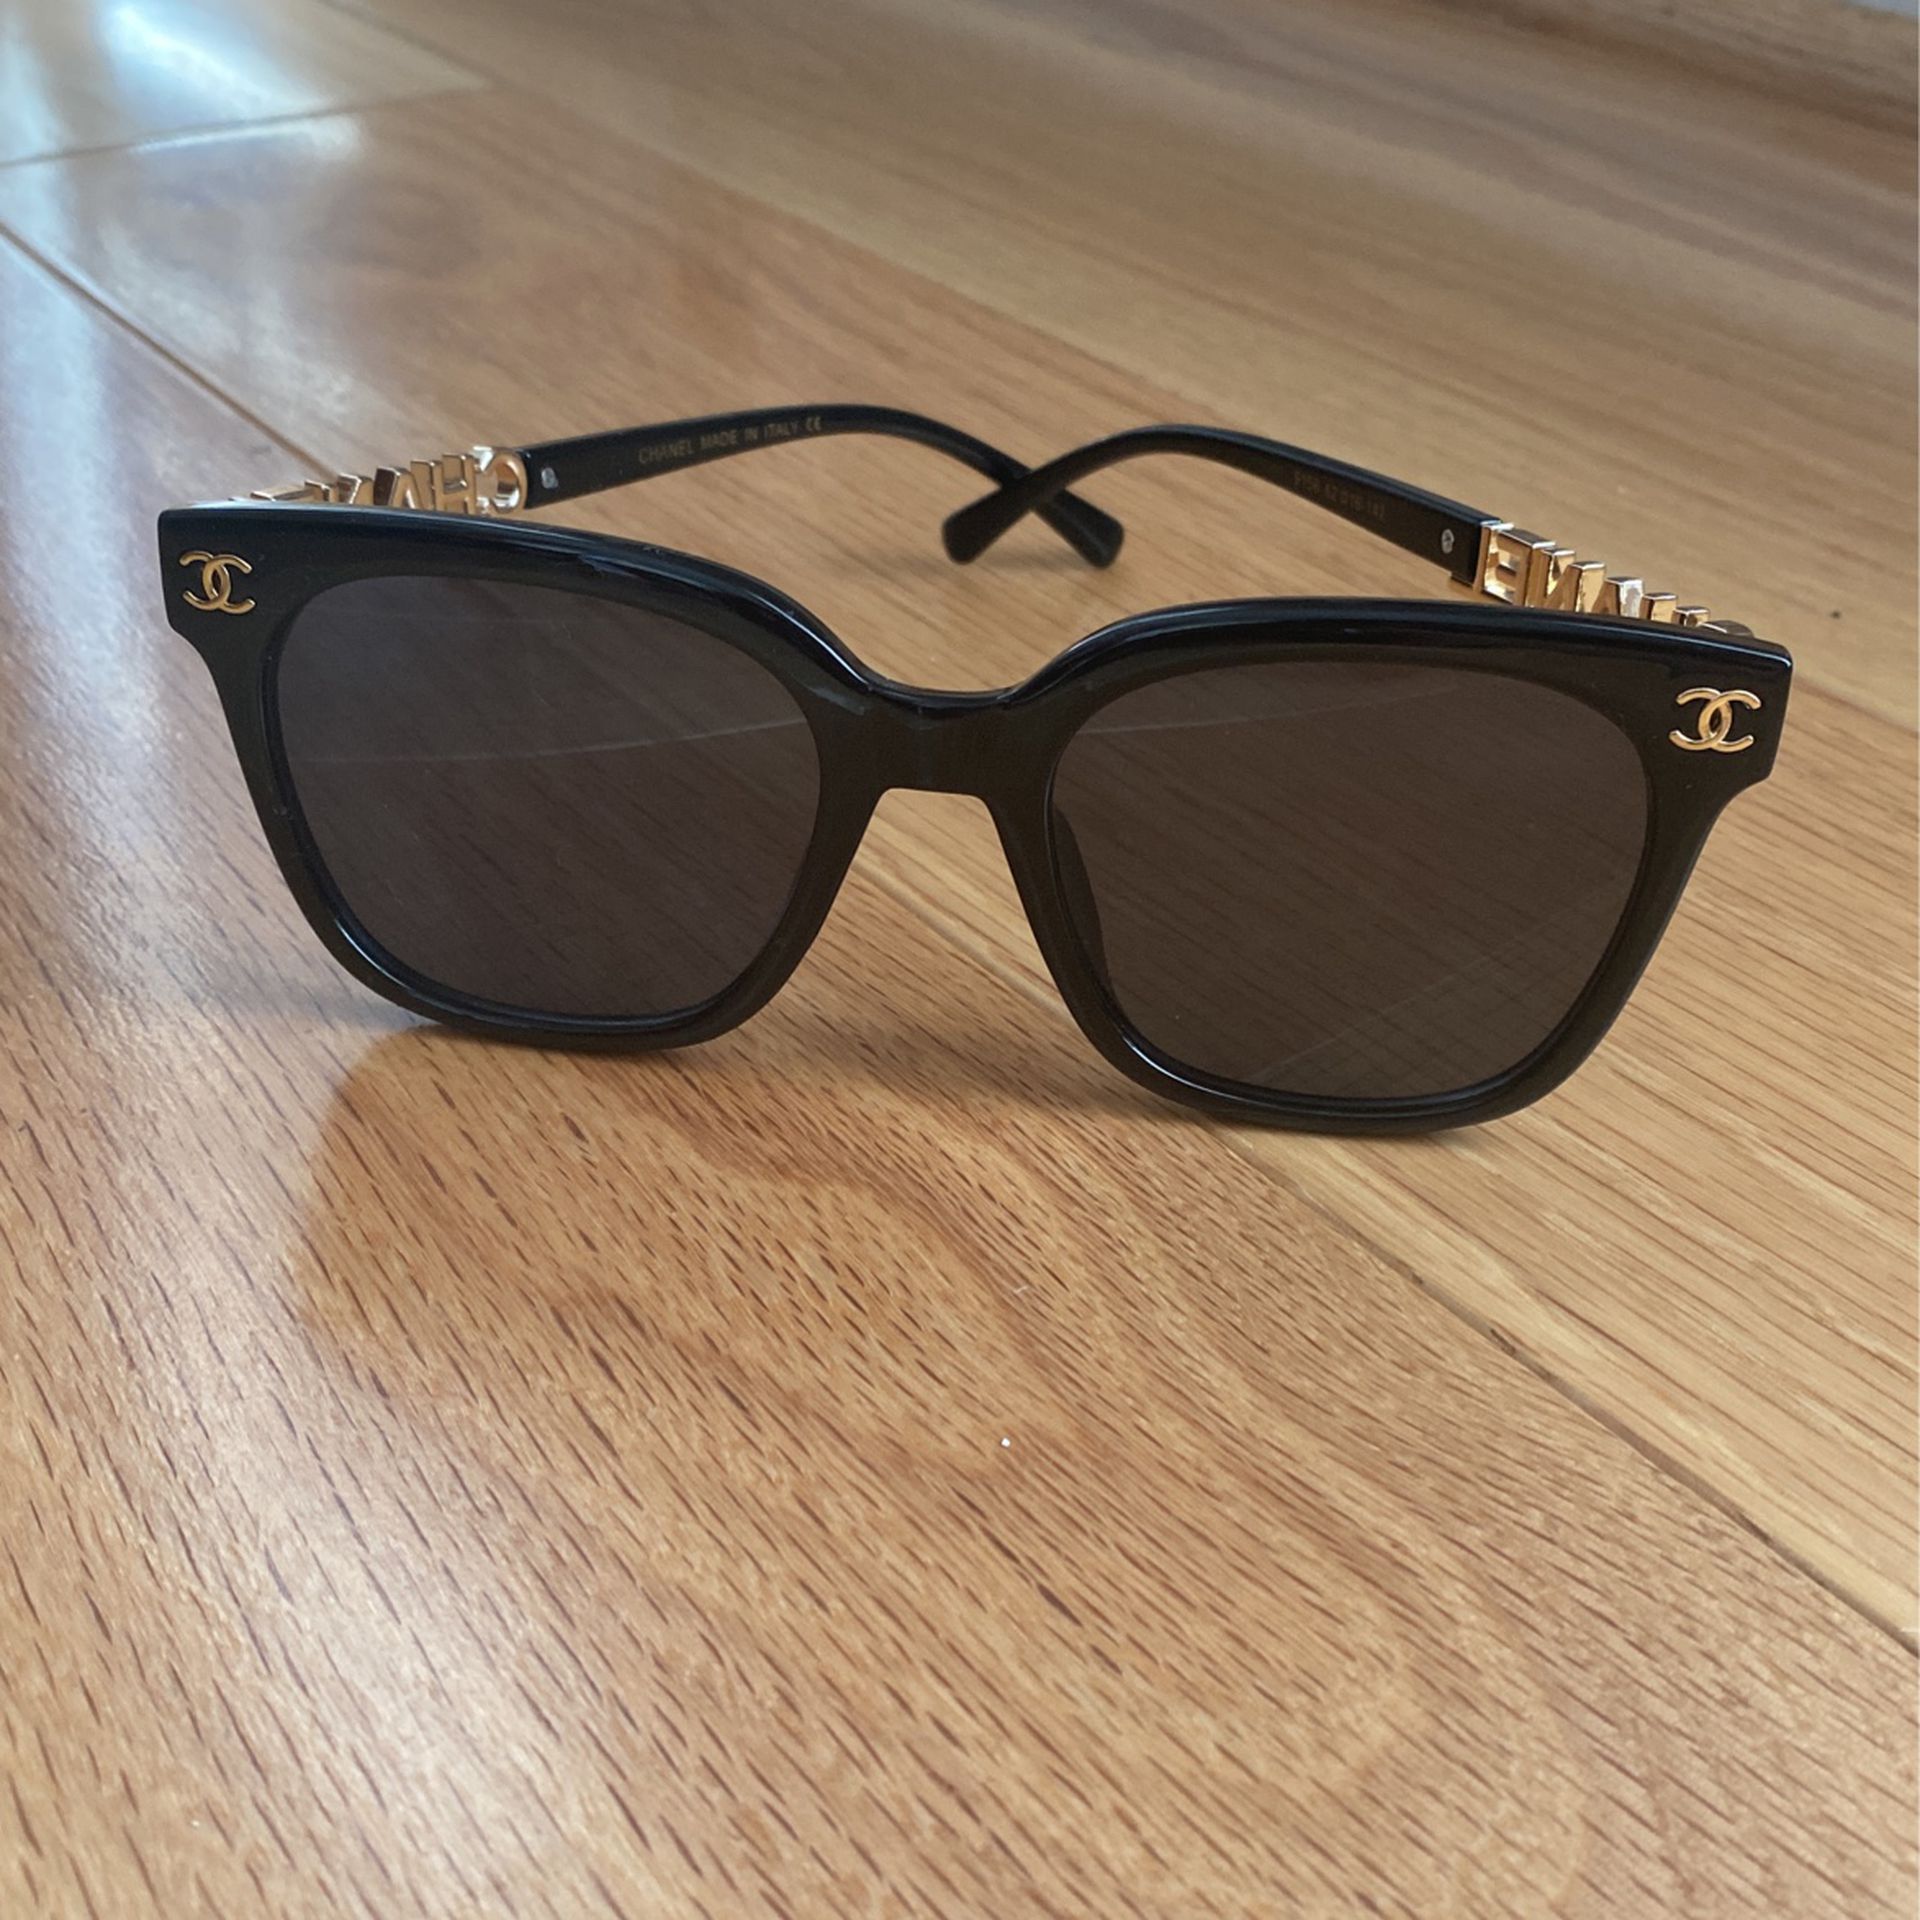 Chanel Sunglasses for Sale in Rockville, MD - OfferUp